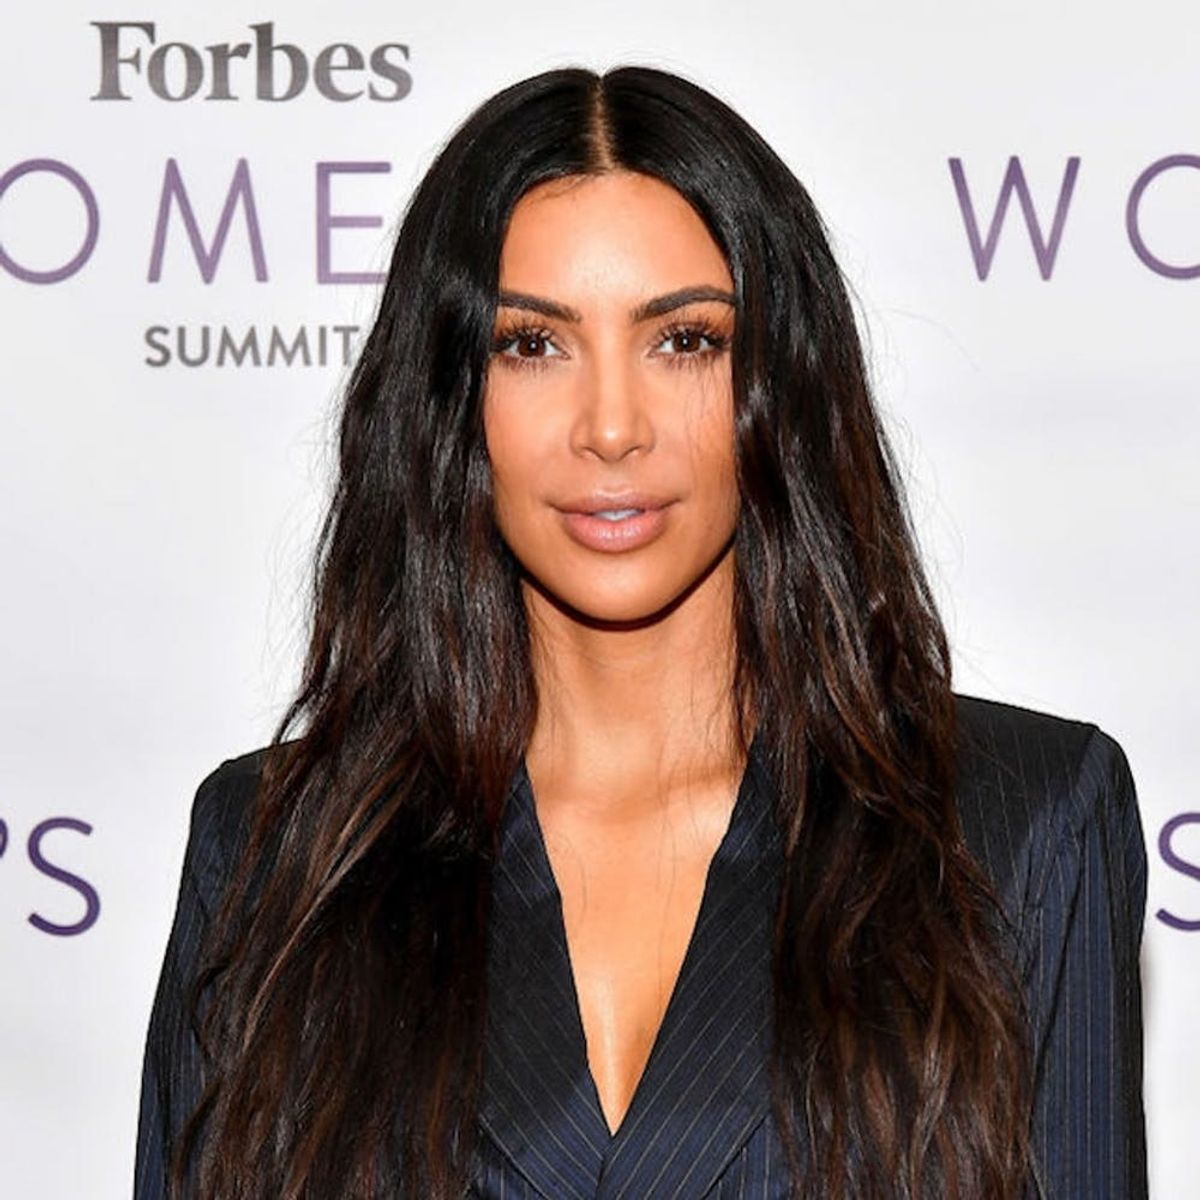 Kim Kardashian West’s Makeup Line Is Projected to Make HOW Much?!